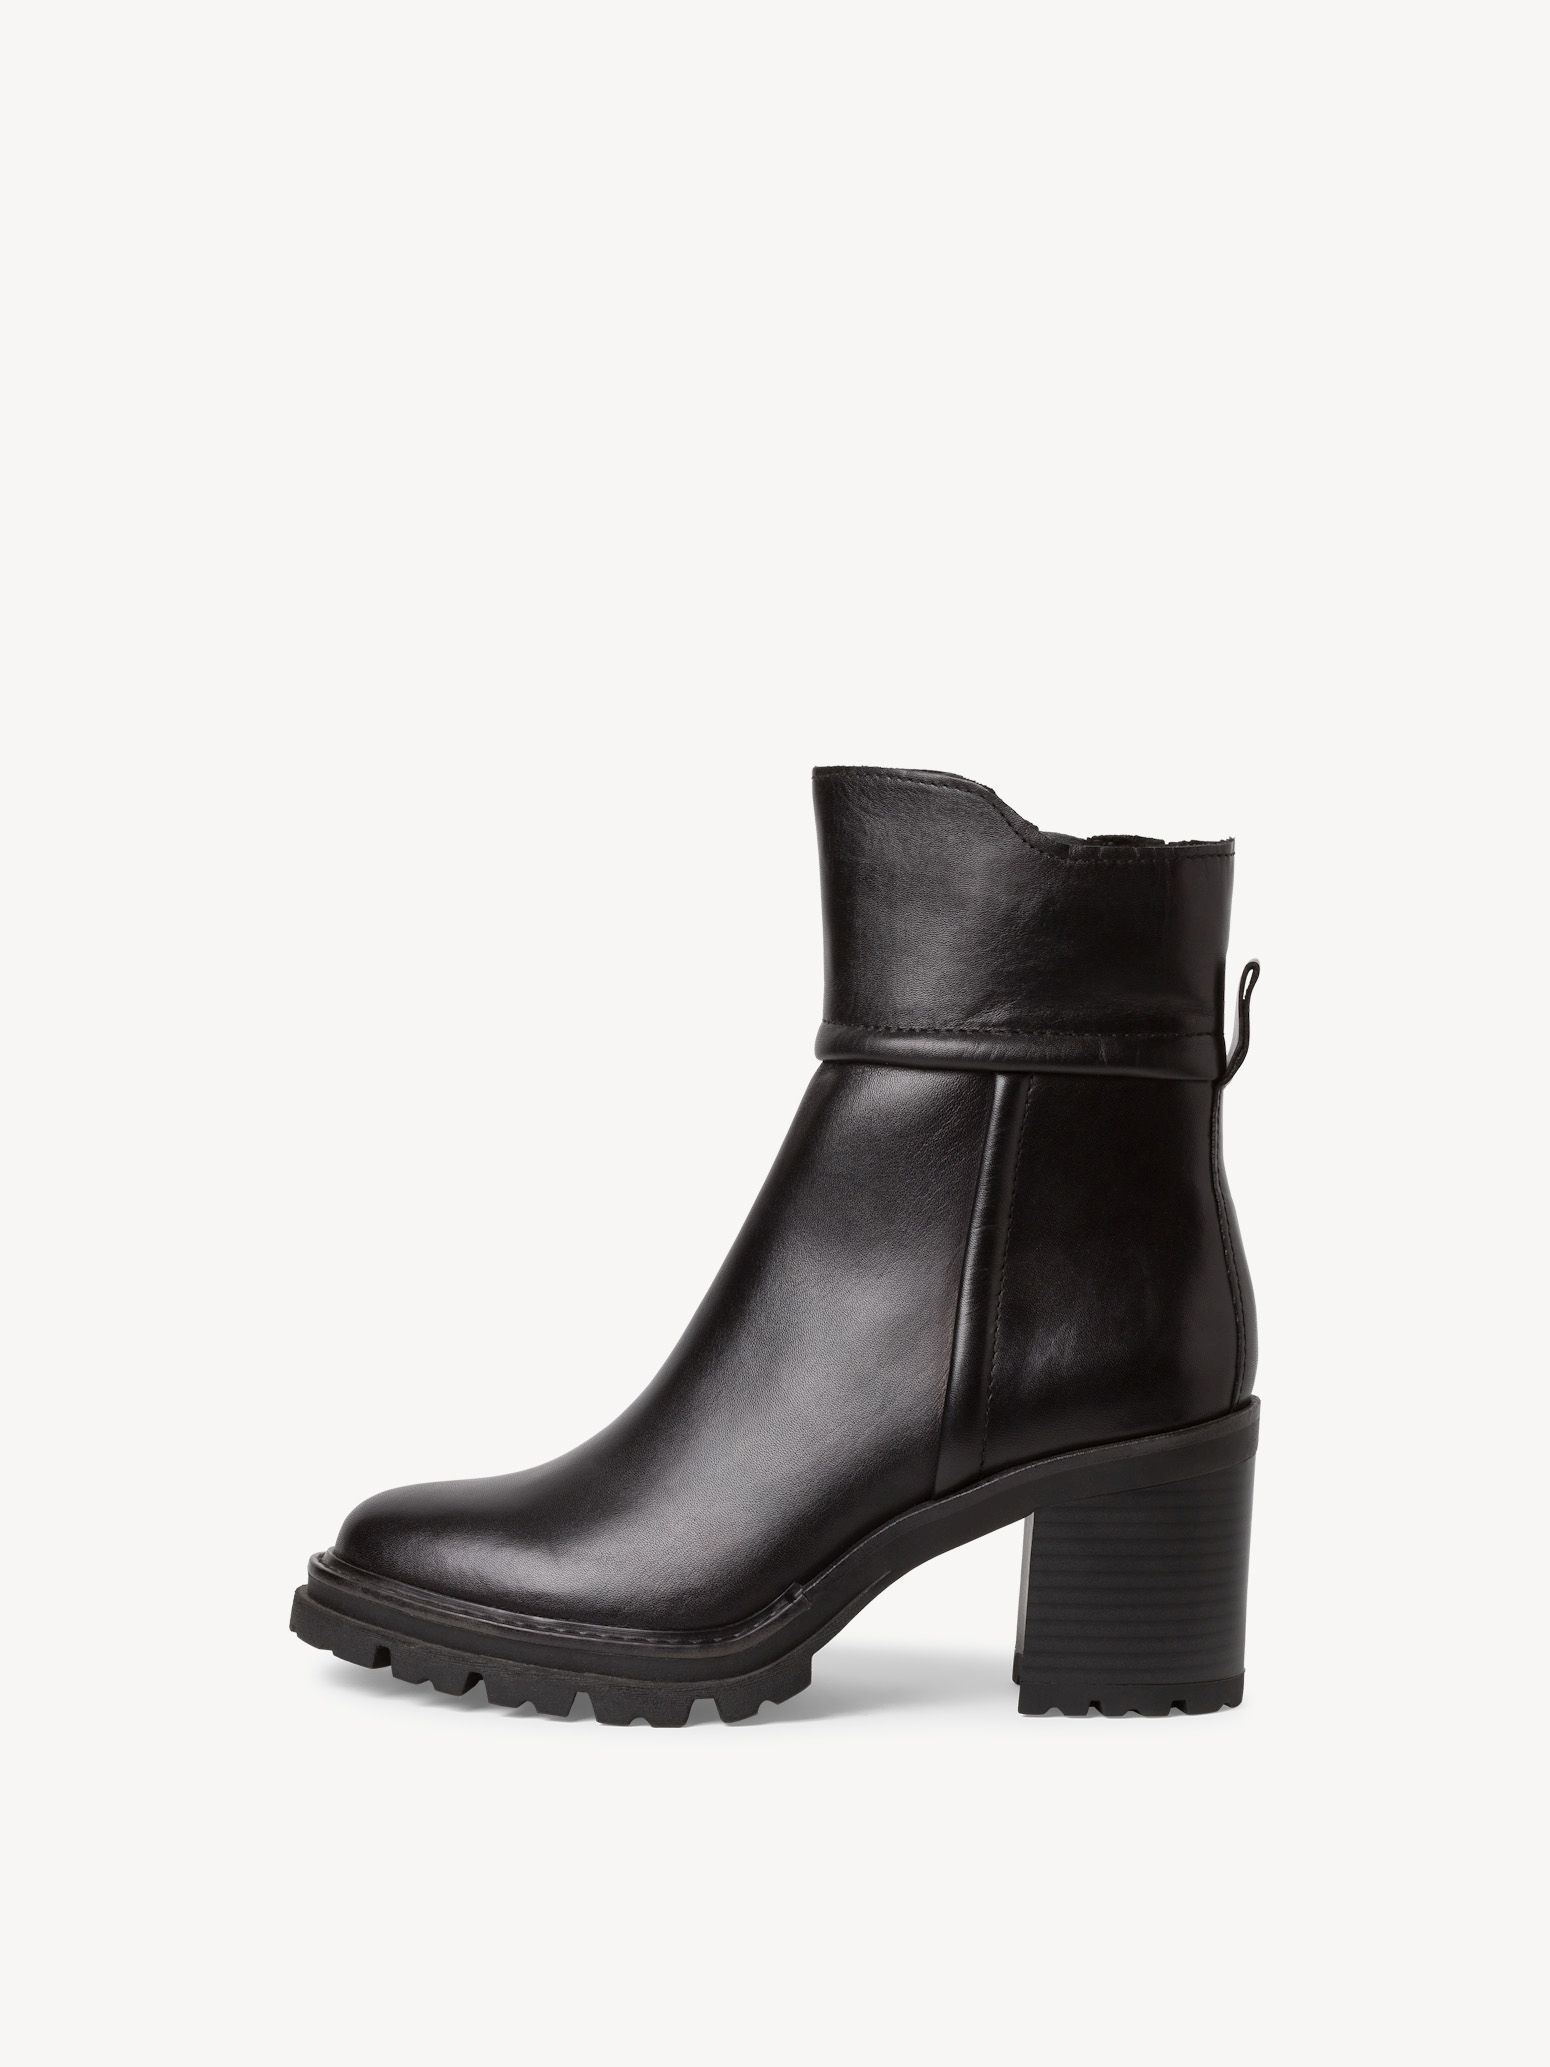 Leather Bootie 2-25457-41: Buy Ankle boots with heel from Marco Tozzi ...